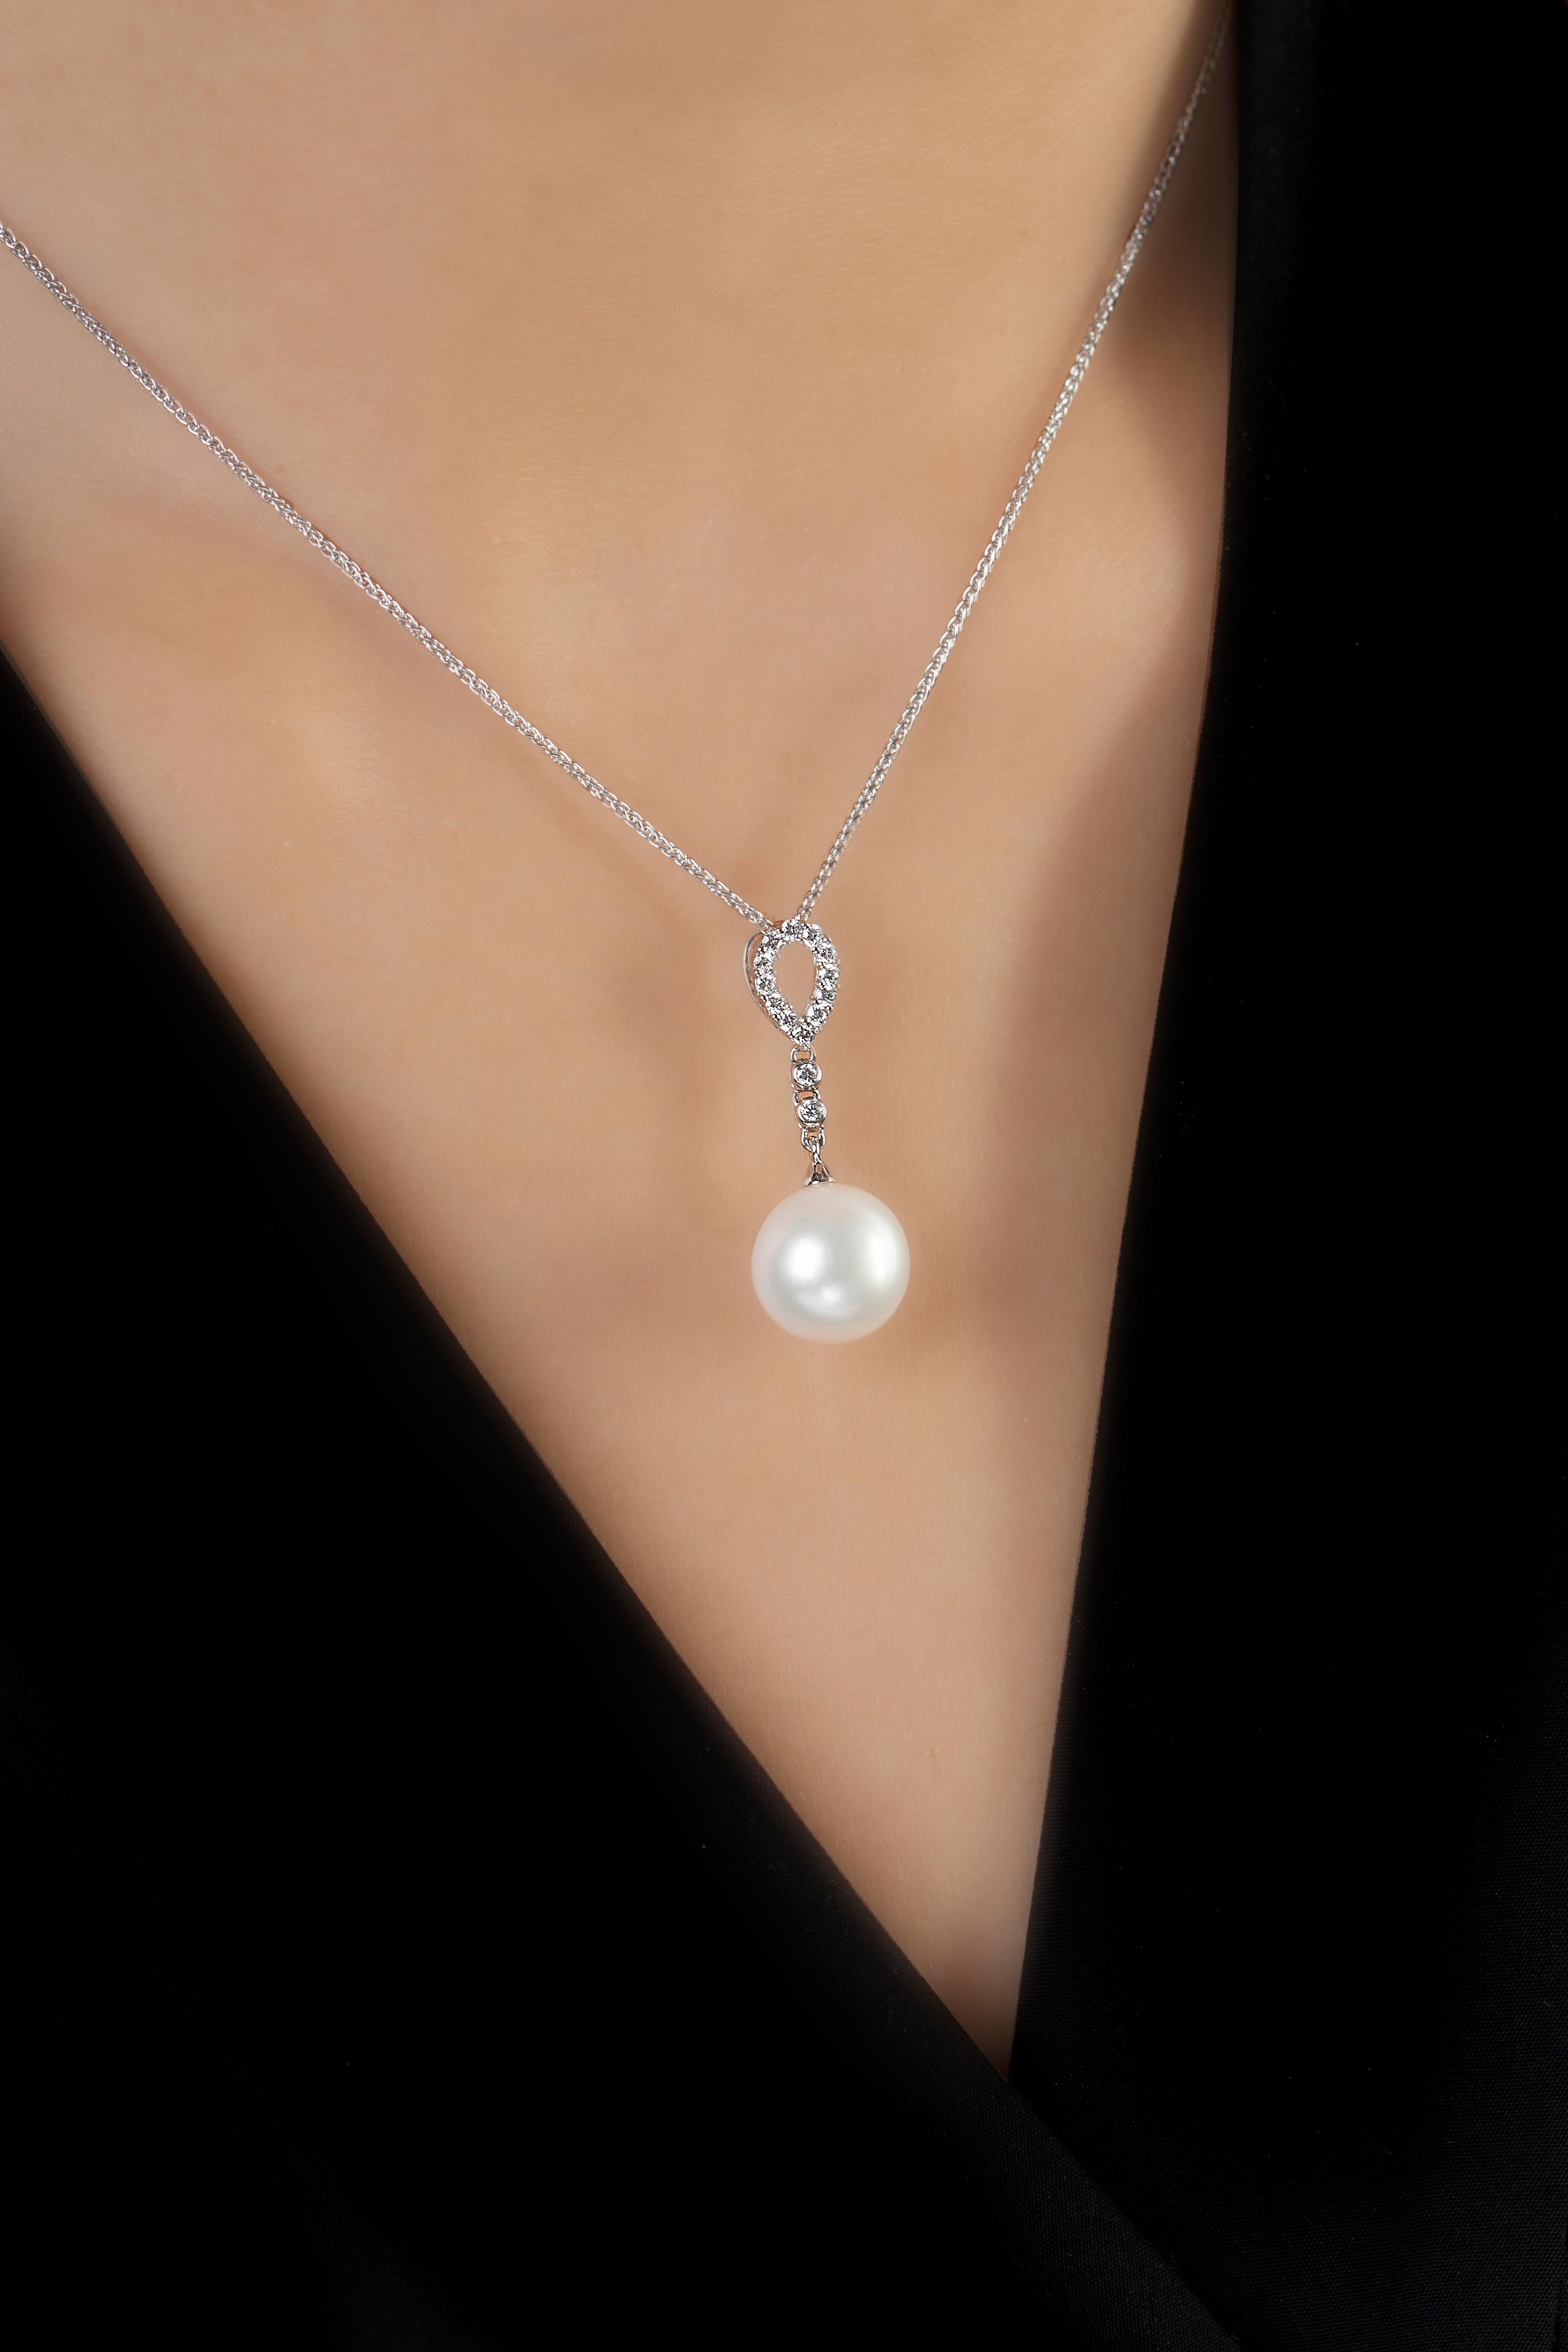 This delicate pendant by Yoko London feature a spectacular 10-10.5mm Freshwater pearl beneath a scintillating arrangement of diamonds. Pair this pendant with both daytime and evening looks to add an unrivalled touch of elegance.  
-10-10.5mm